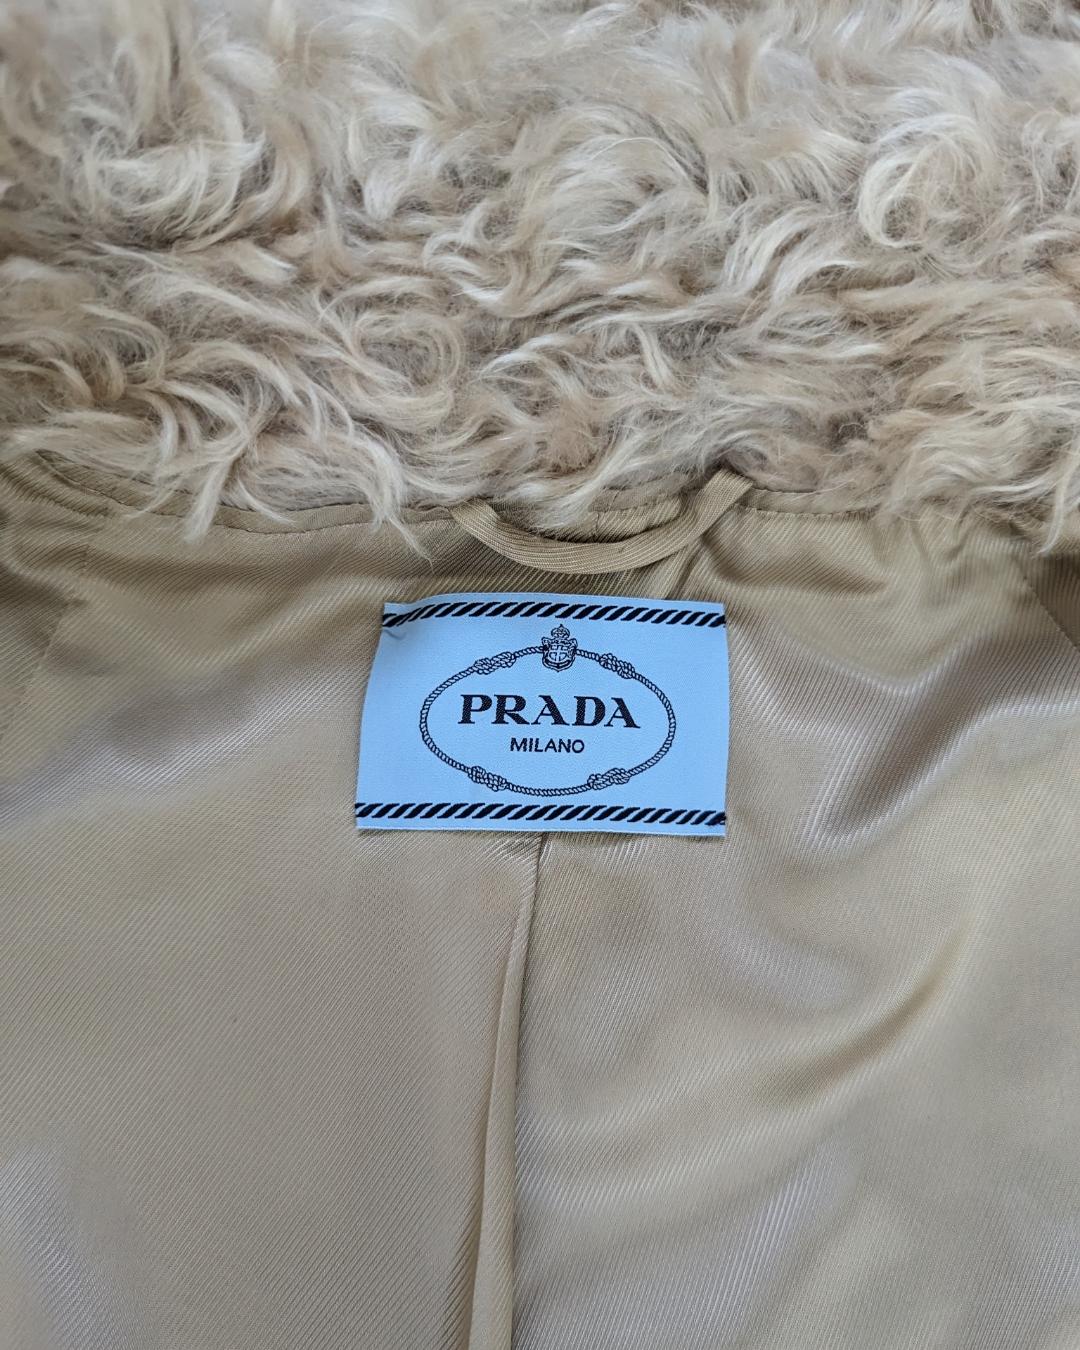 Prada Faux Fur Coat In Good Condition For Sale In GOUVIEUX, FR